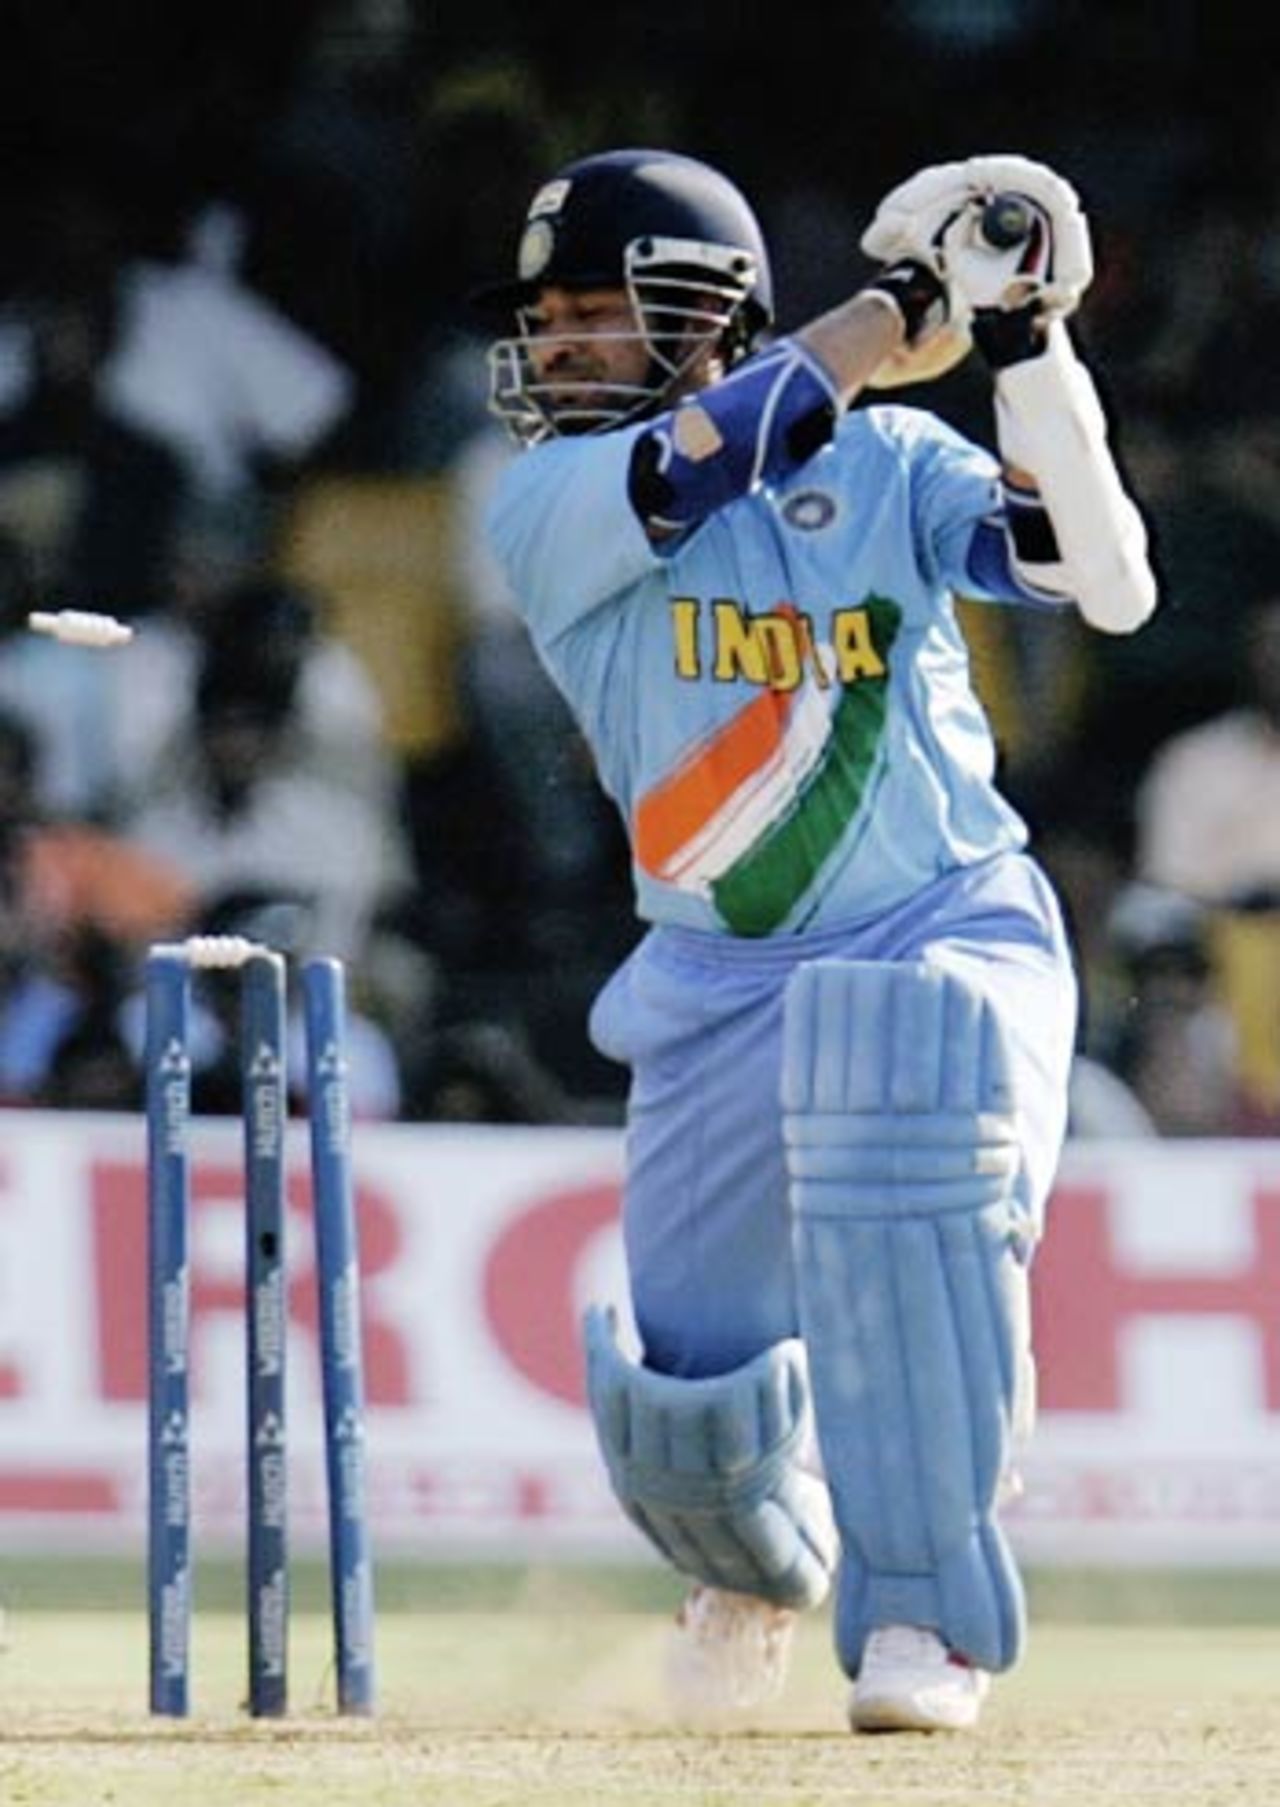 Sachin Tendulkar plays onto his stumps for 29, India v West Indies, 9th match, Champions Trophy, Ahmedabad, October 26, 2006